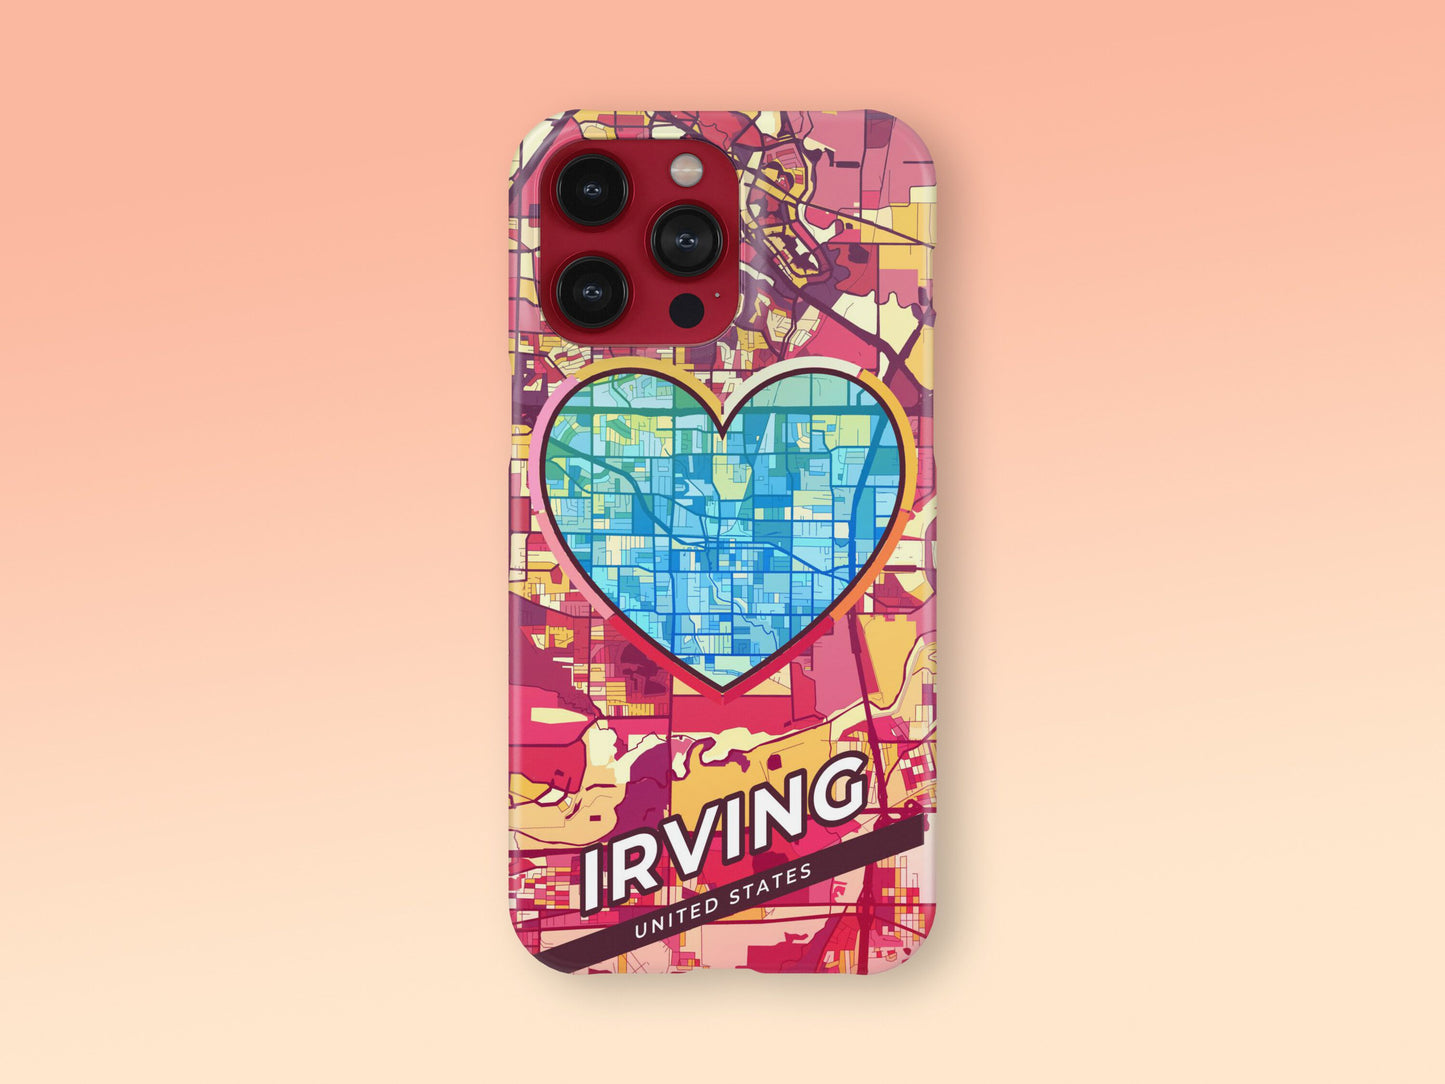 Irving Texas slim phone case with colorful icon. Birthday, wedding or housewarming gift. Couple match cases. 2